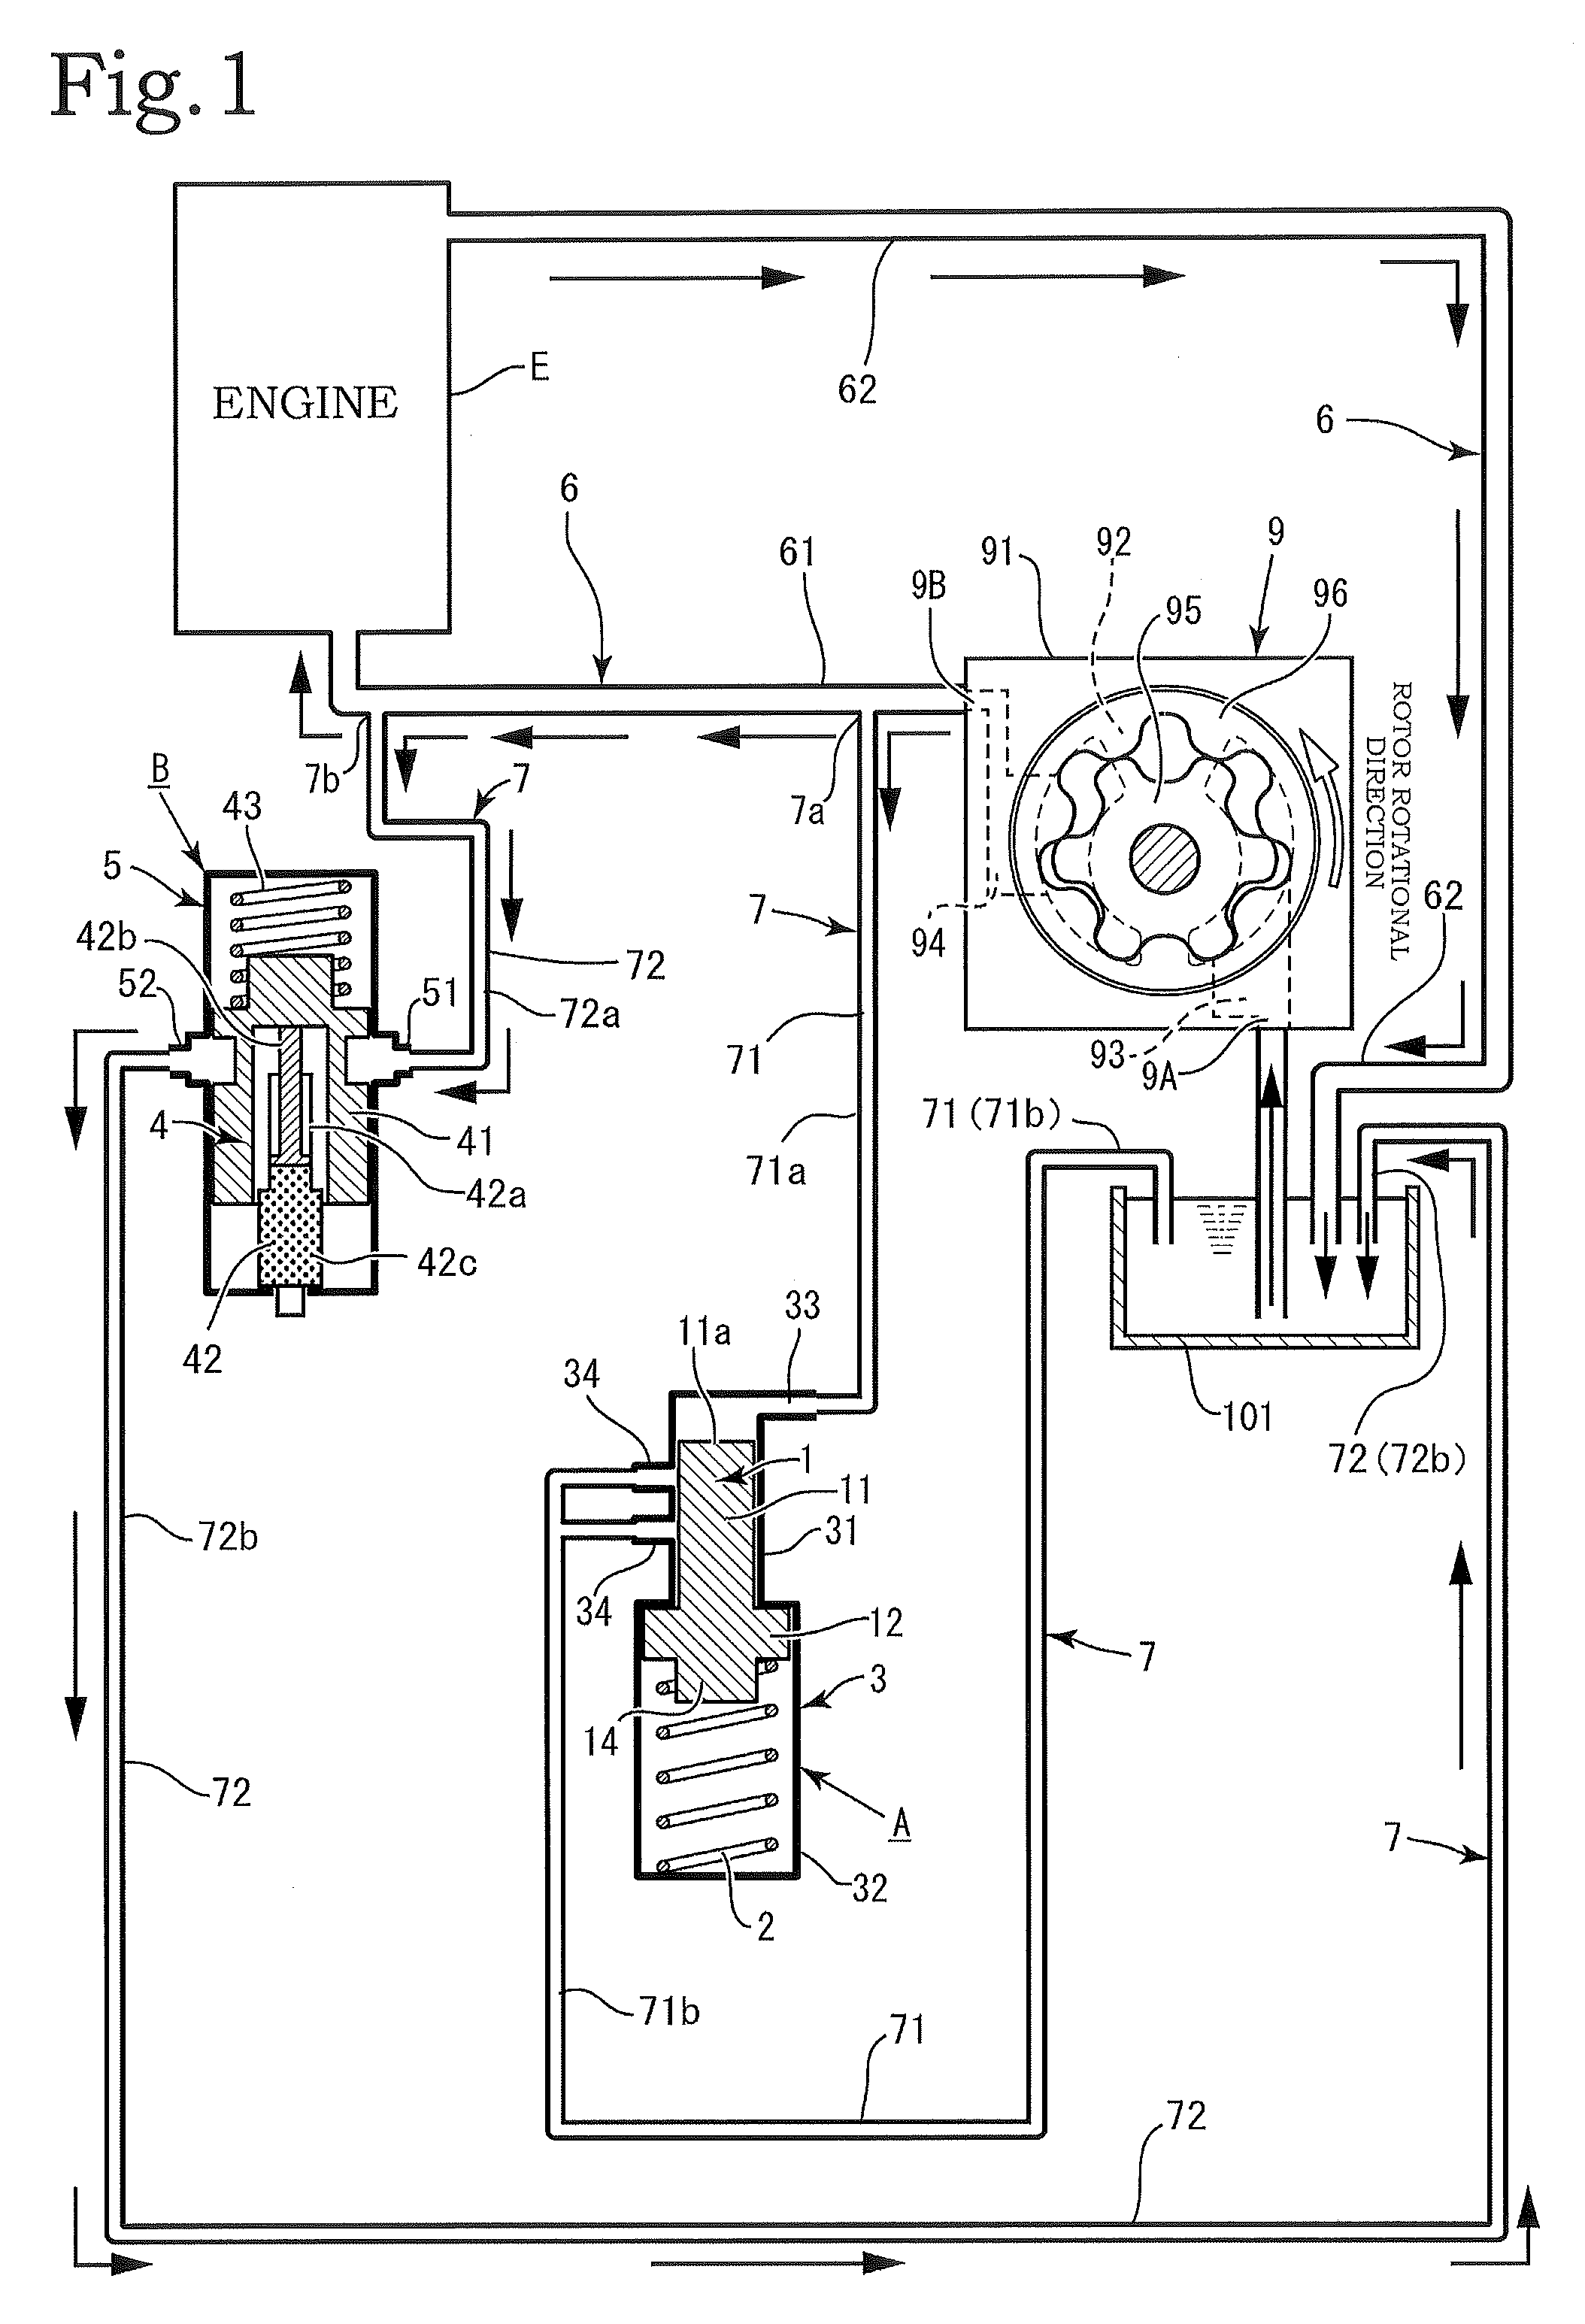 Relief device for oil circuit of engine